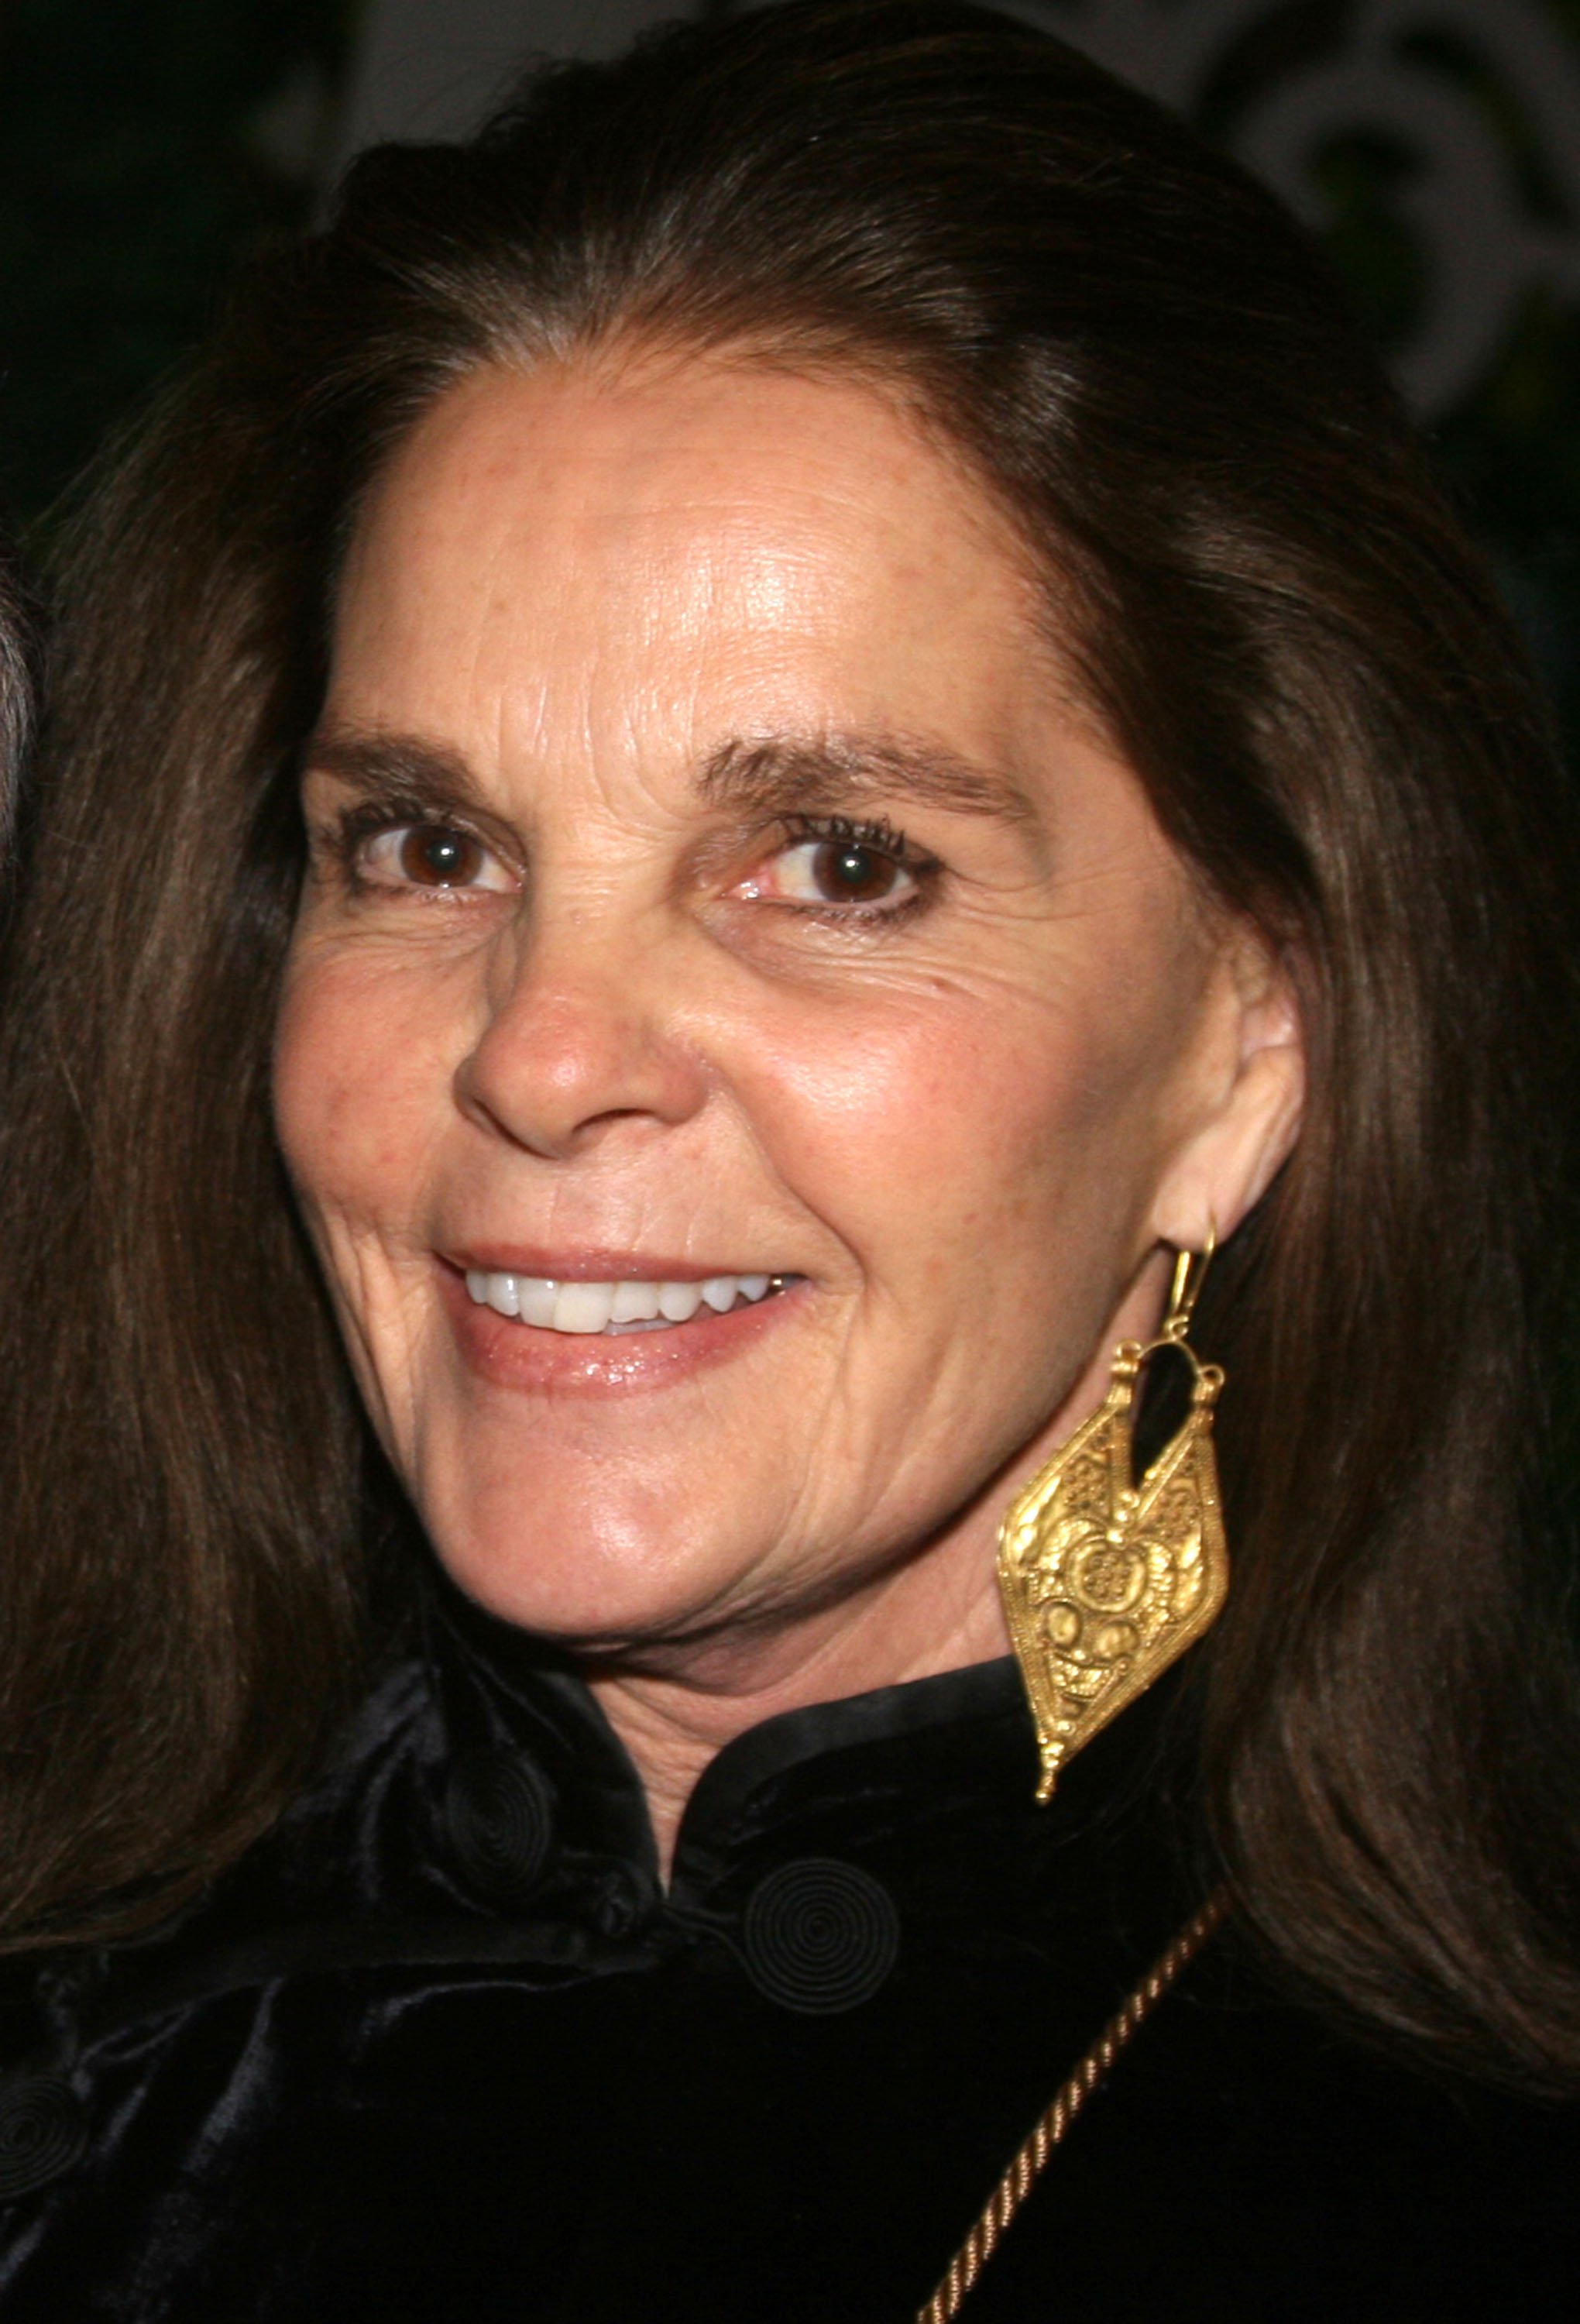 Ali MacGraw in New York, NY, United States in 2006. | Source: Getty Images